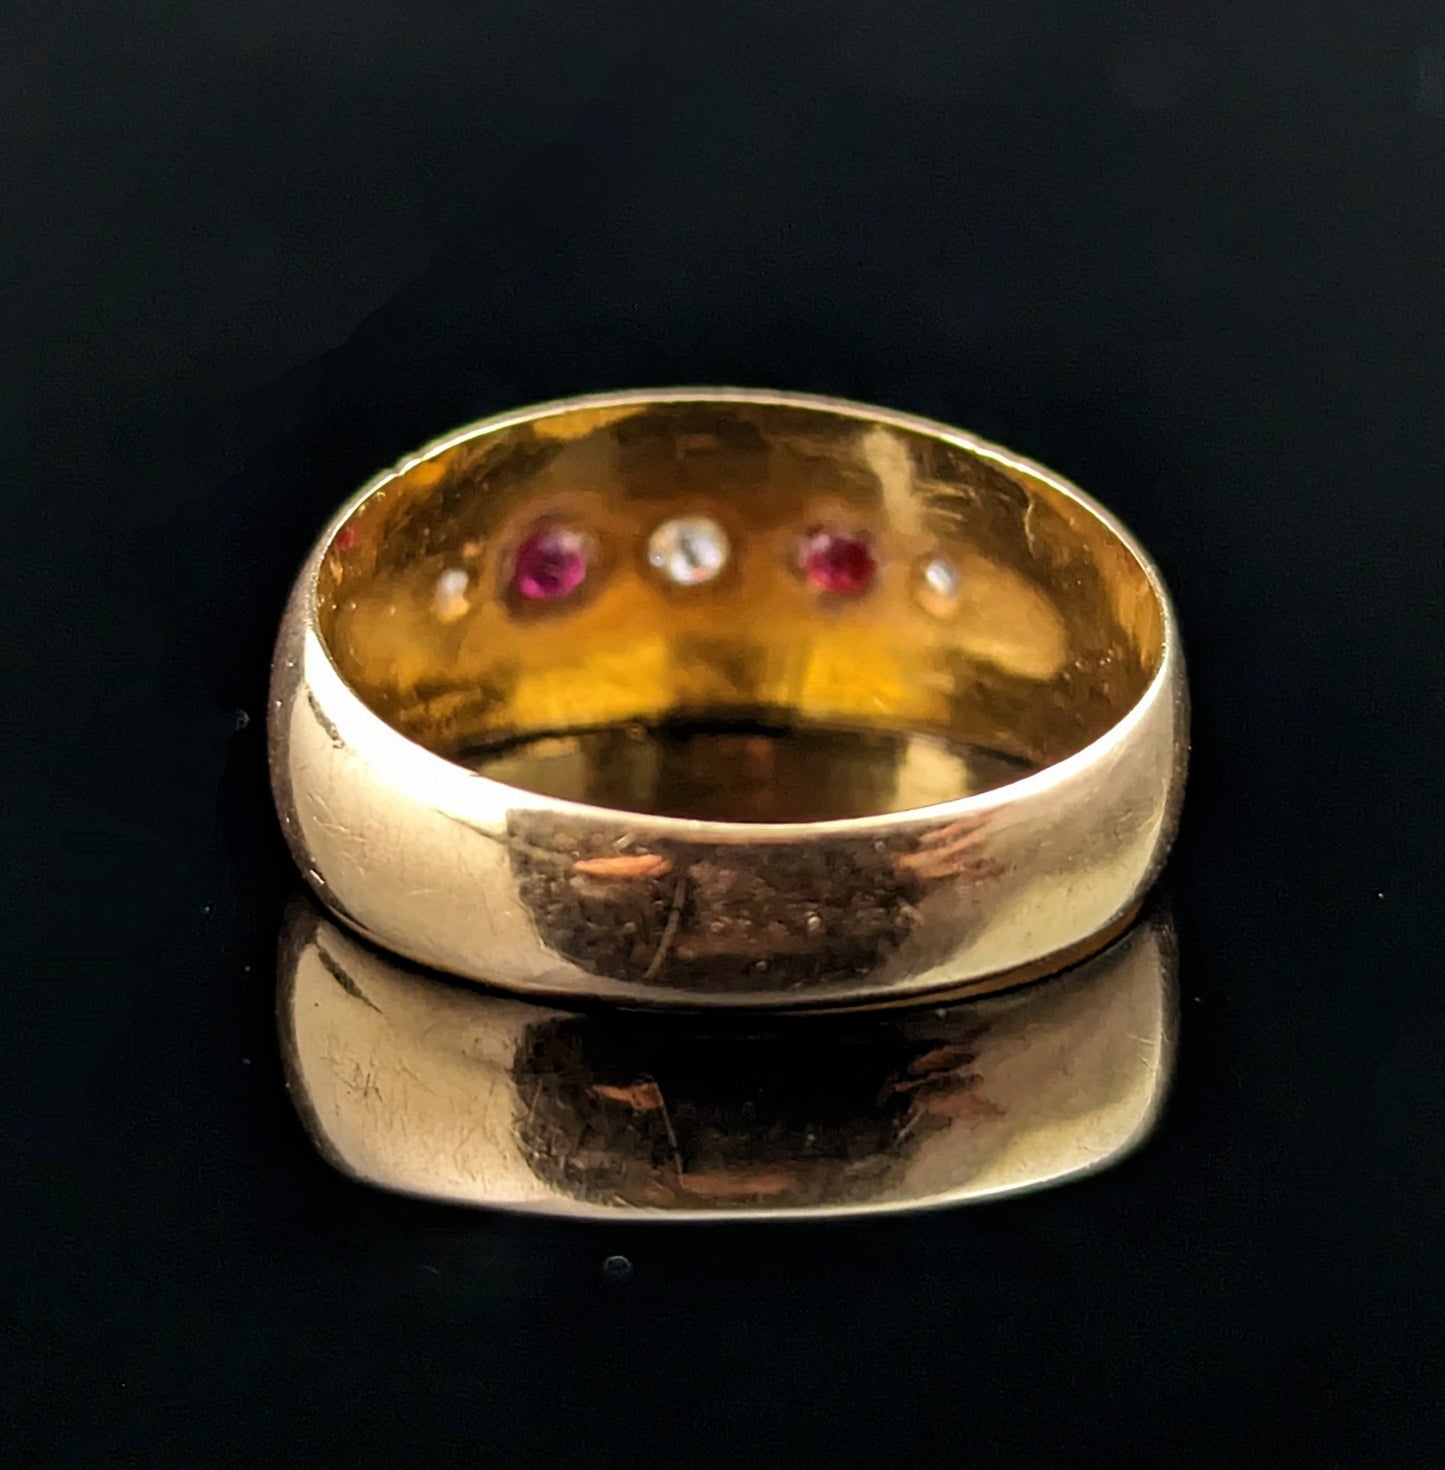 Antique Ruby and Diamond gypsy set ring, 18ct gold, Edwardian, stars